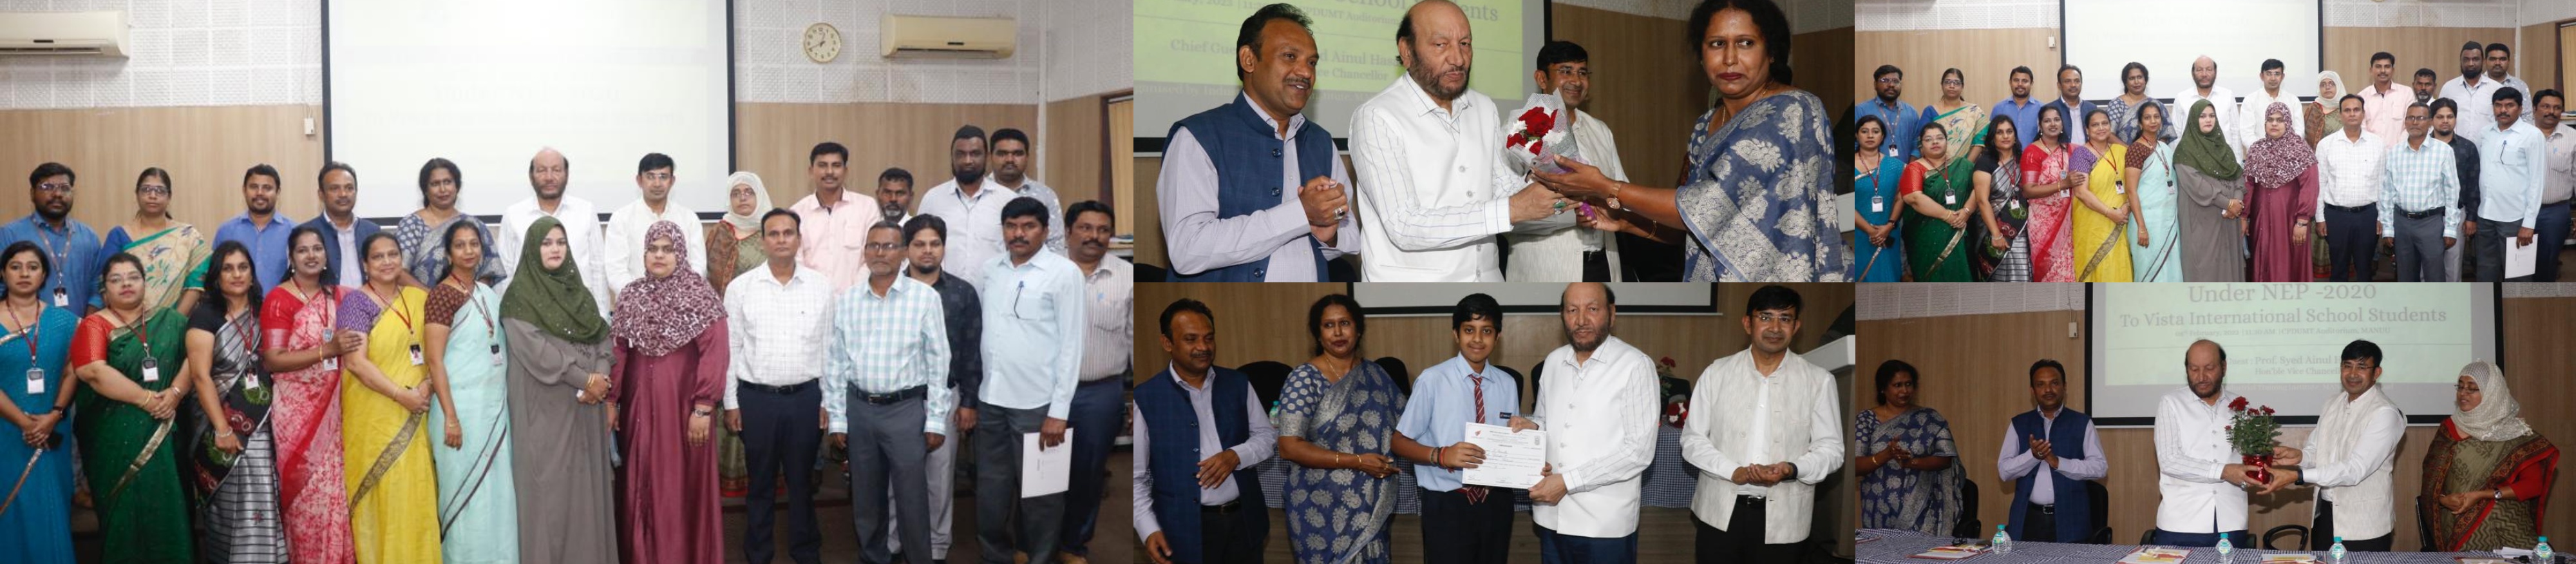 Certificate Distribution by Hon’ble Vice Chancellor MANUU under NEP2020 for Vista School, Training organised by MANUU